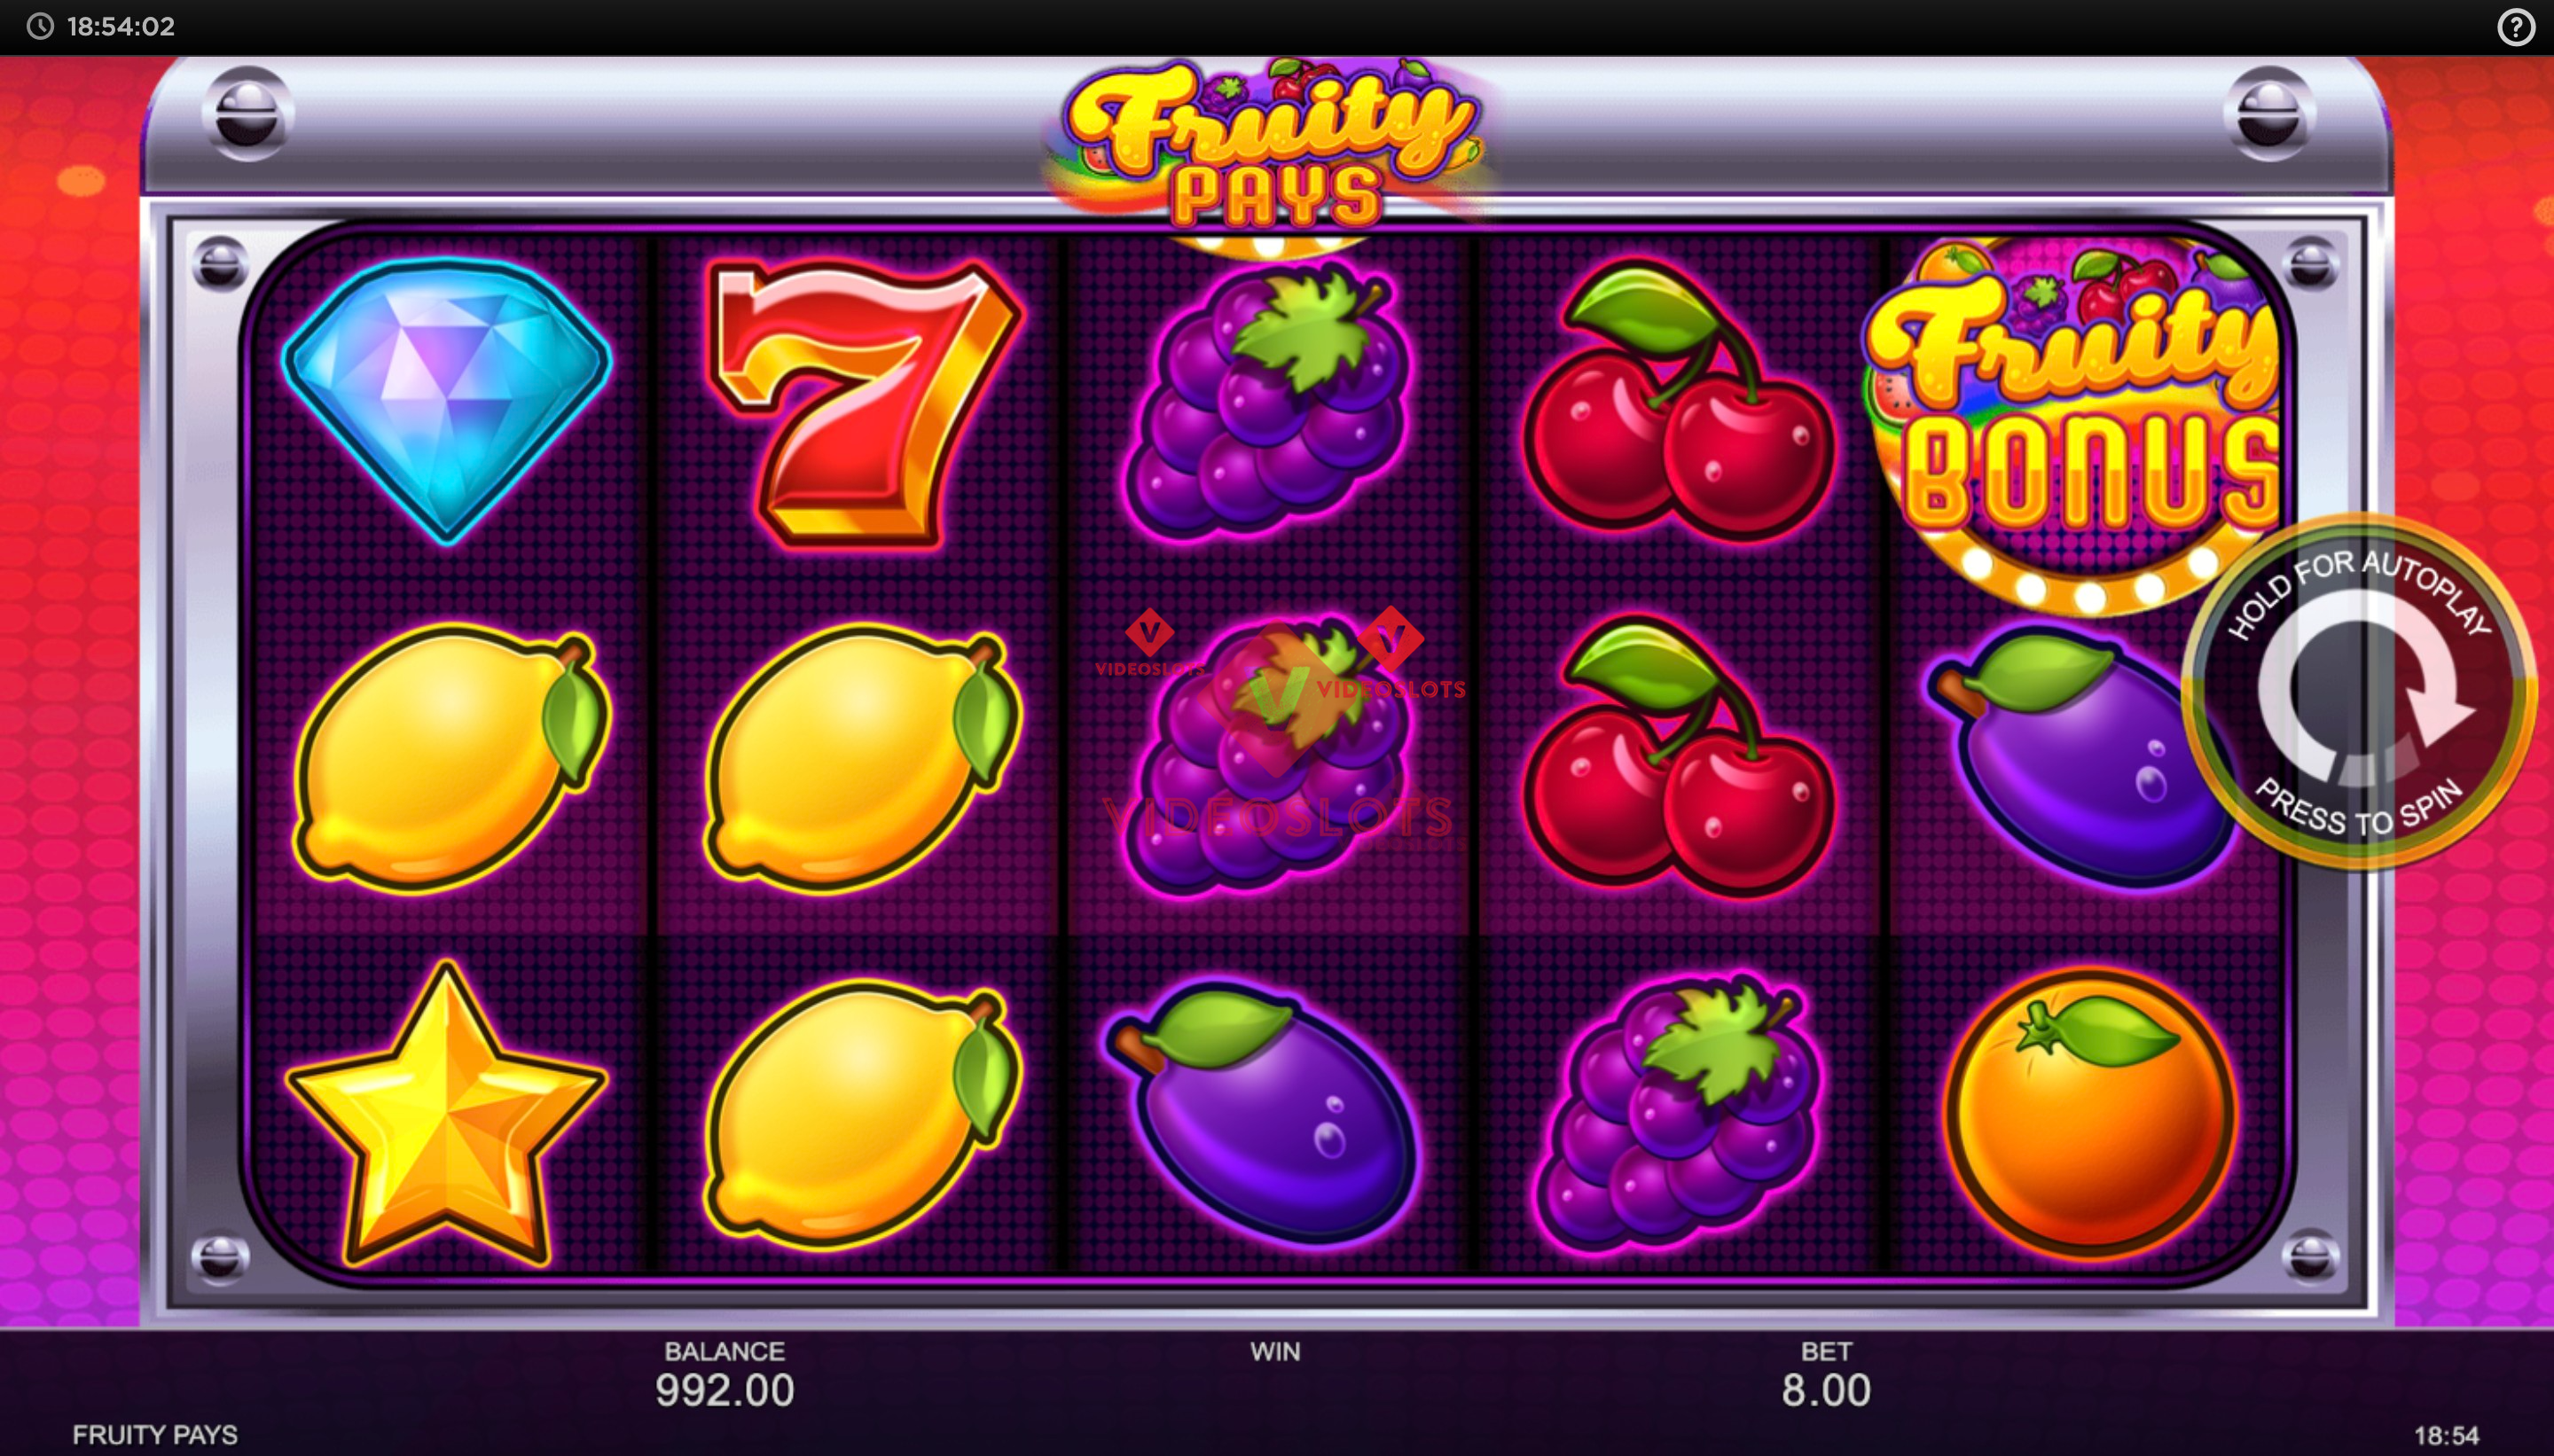 Base Game for Fruity Pays slot from Inspired Gaming